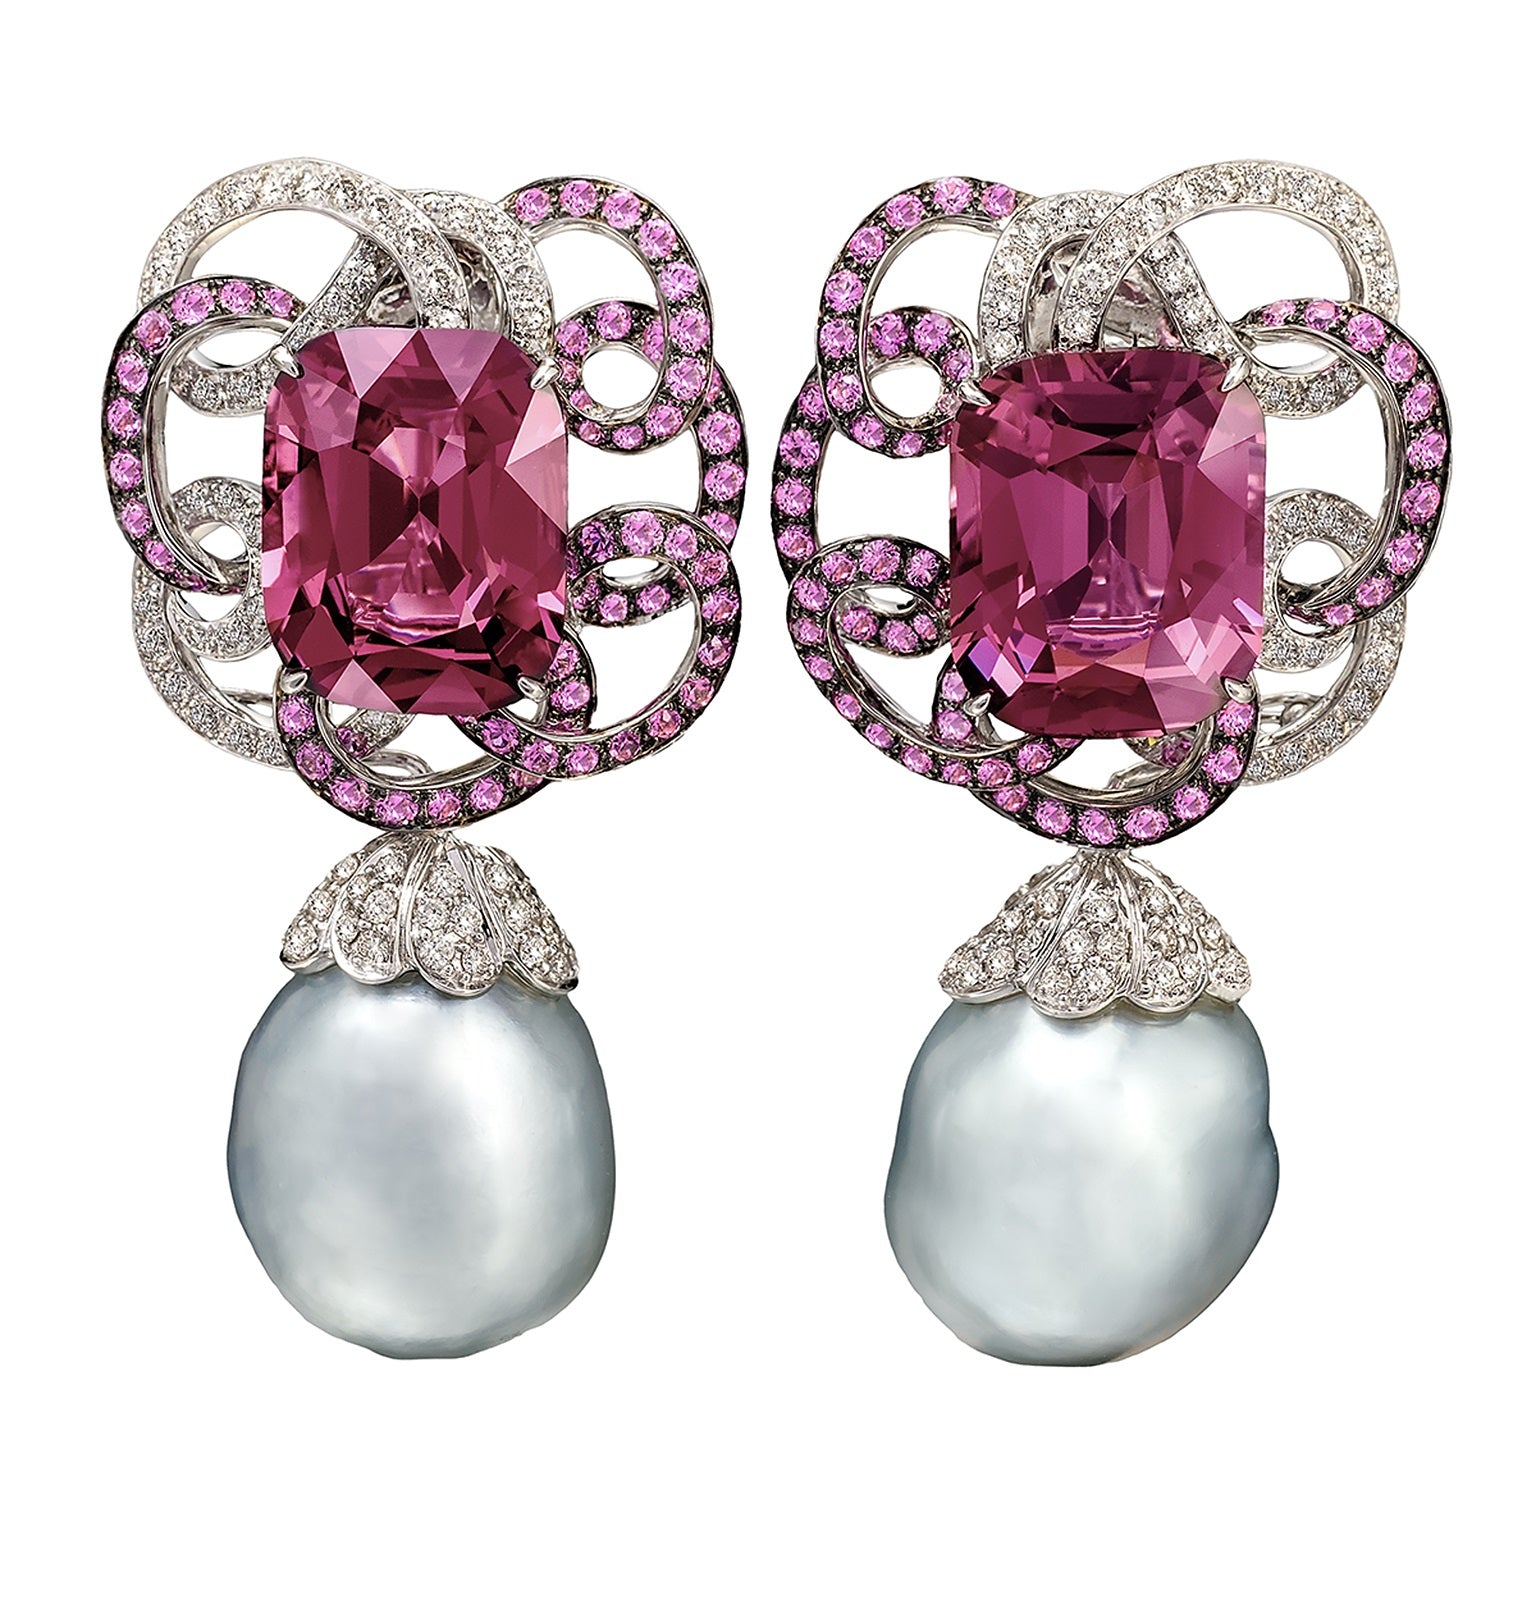 Purple and Pink Spinel Swirl Earrings with South Sea pearl drops enhanced by diamonds and pink sapphires, crafted in 18 karat white gold